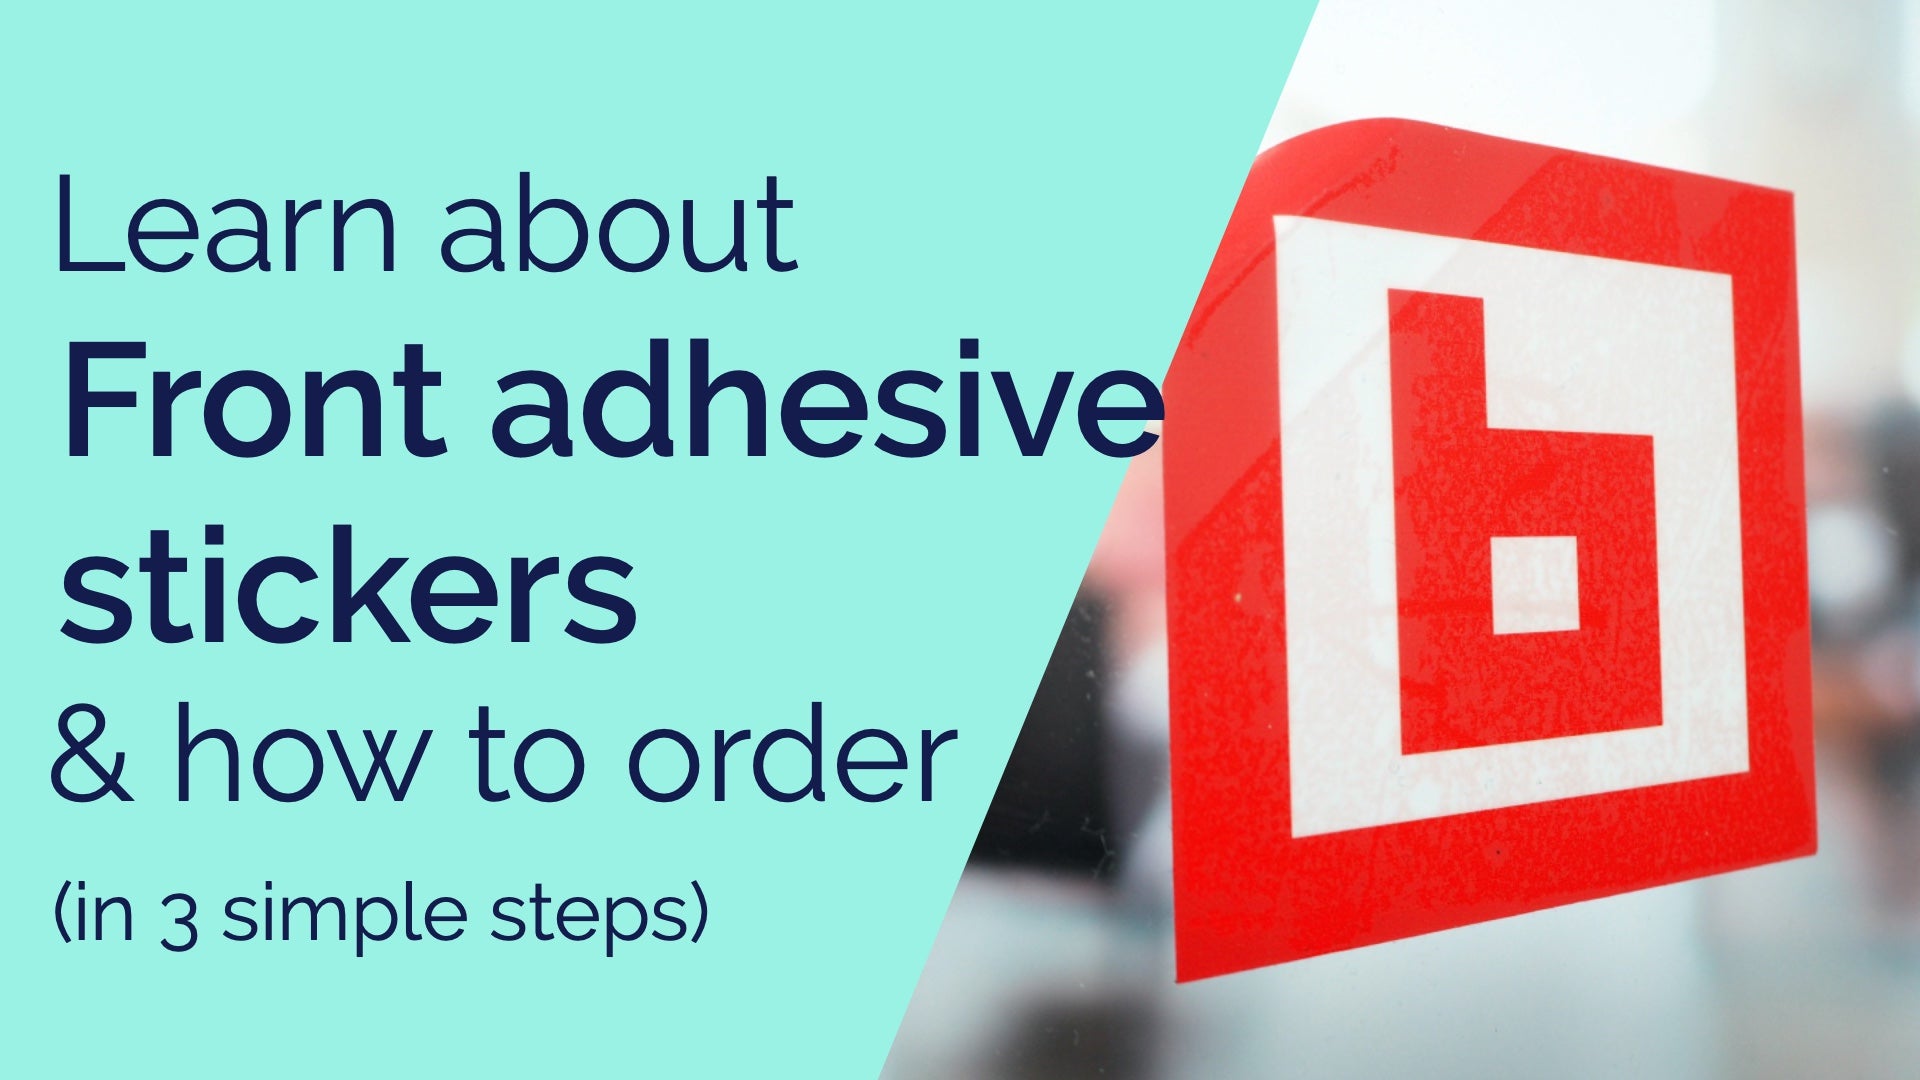 Load video: A video explaining what front adhesive stickers are and how to order them